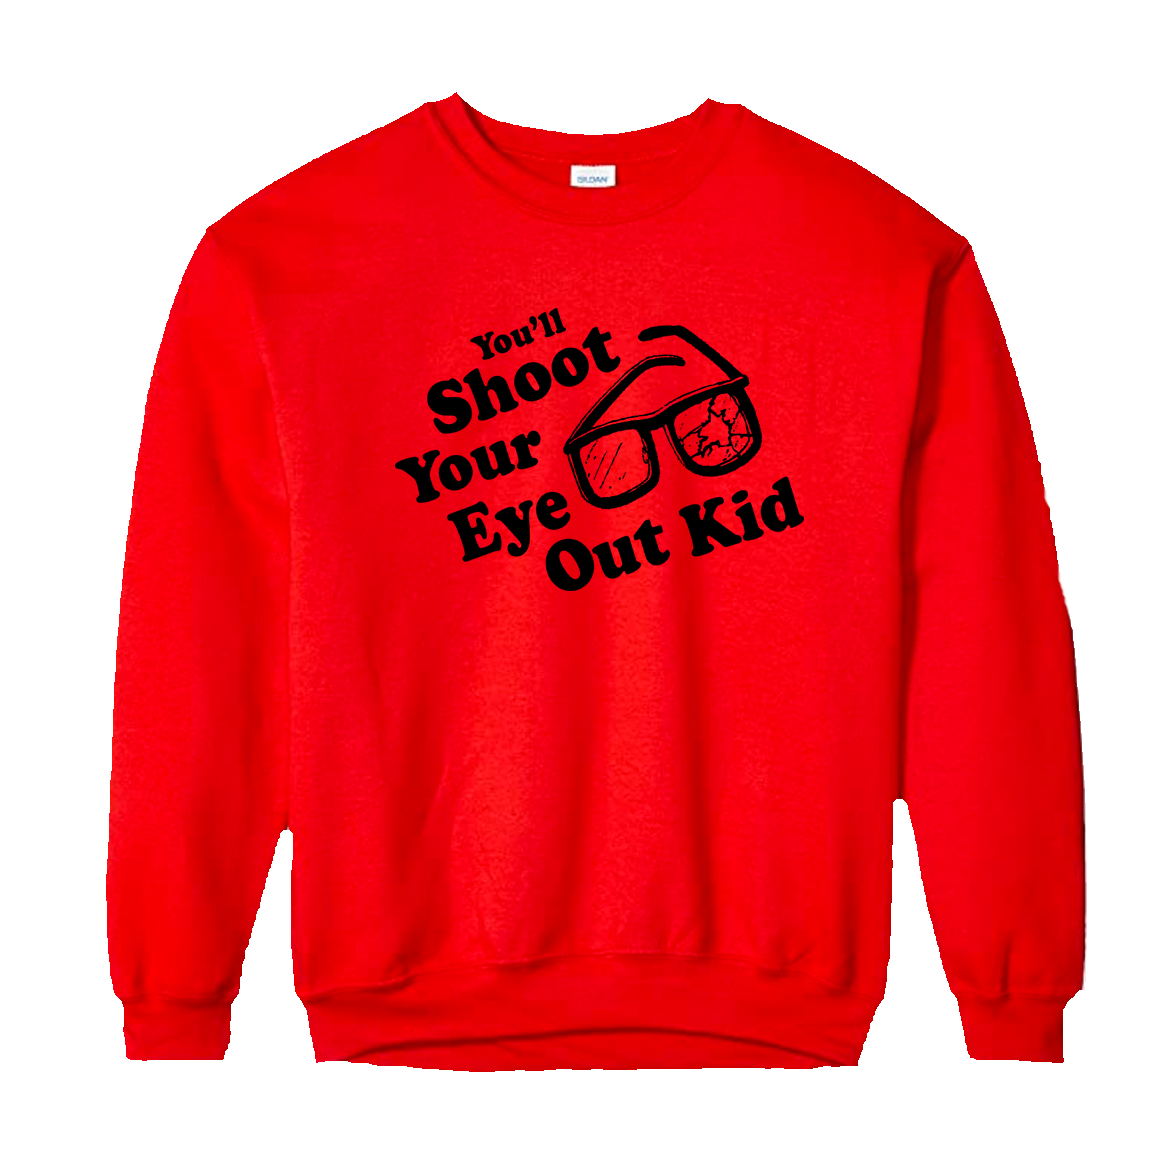 You'll Shoot Your Eye Out Kid! Red Sweatshirt